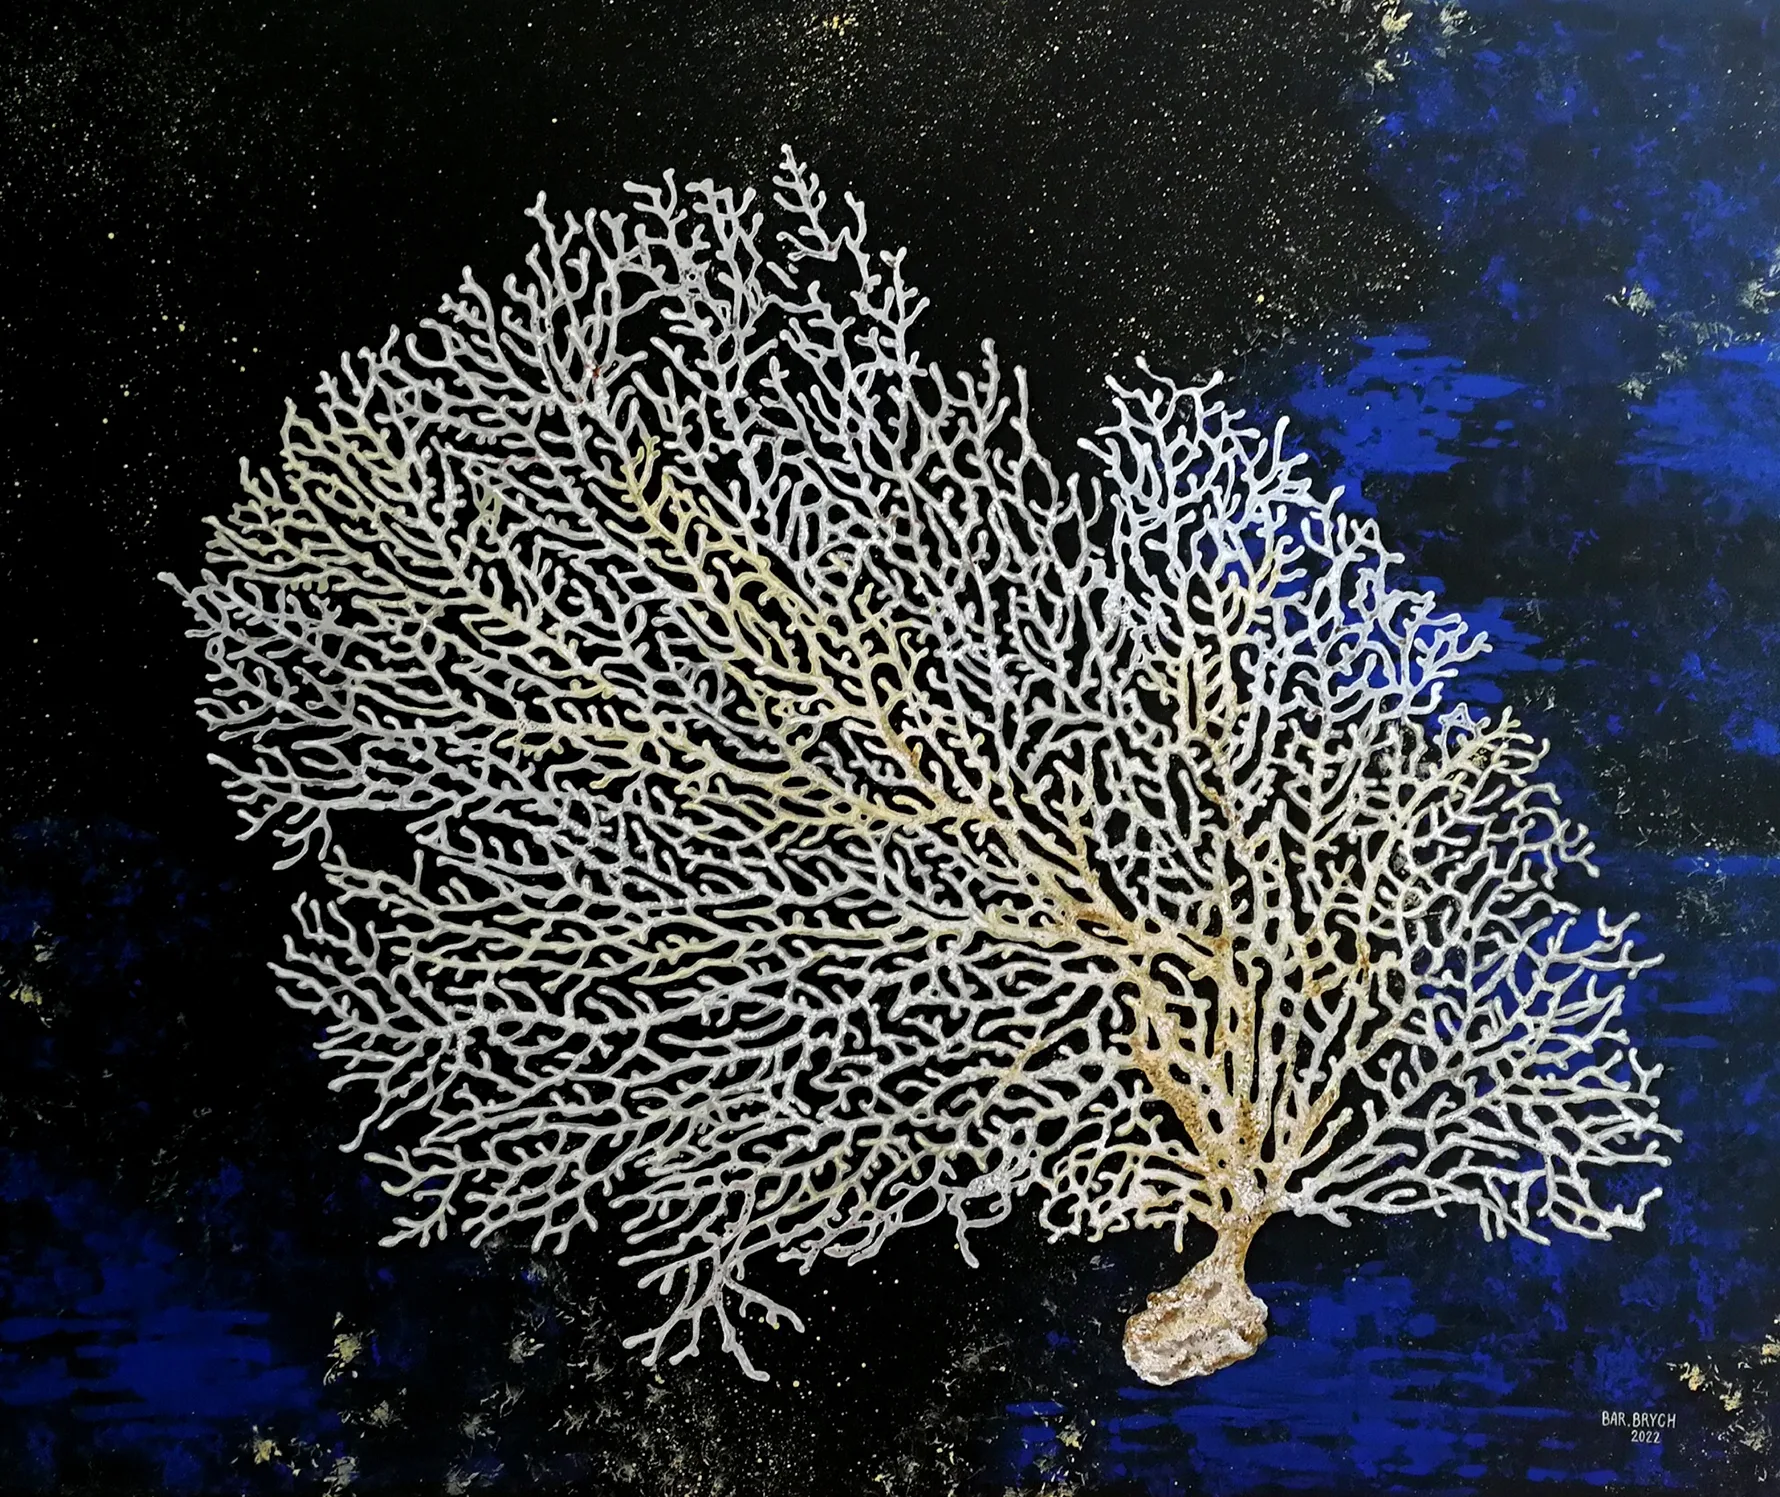 A painting called the Movement Lapis Lazuli, depicting a coral, size 120x100 cm, made in 2022 using the acrylic technique